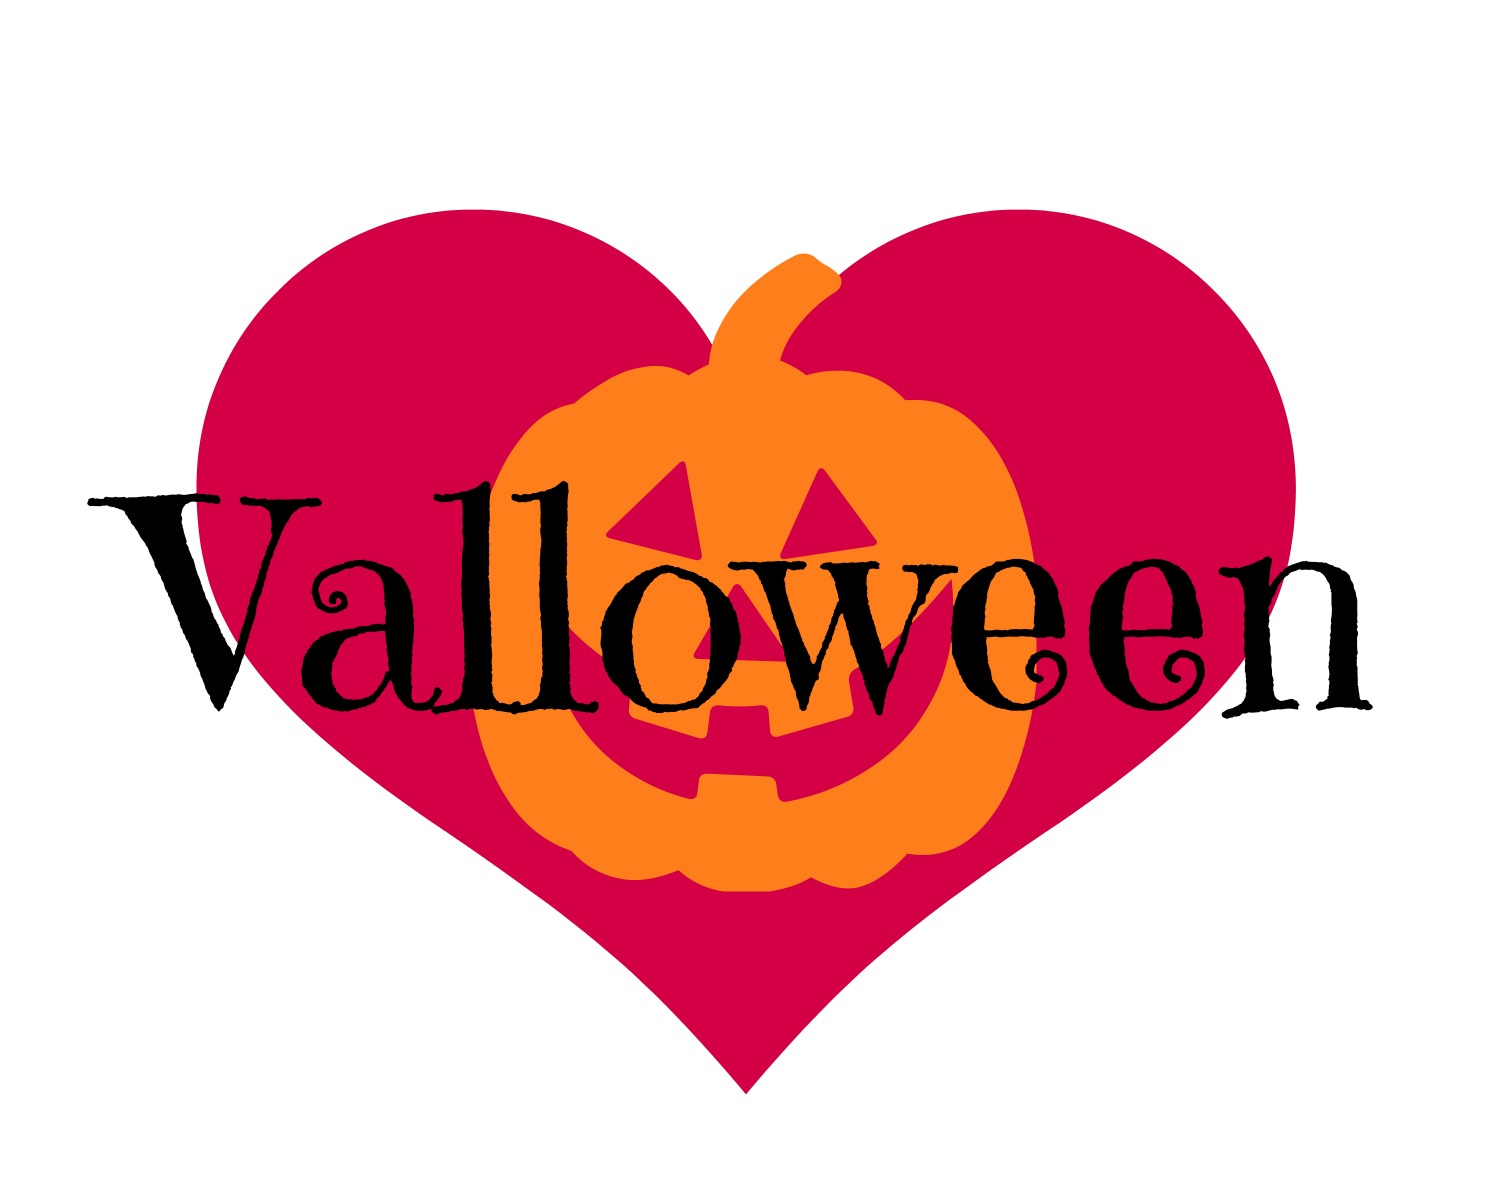 The “Real” Valloween